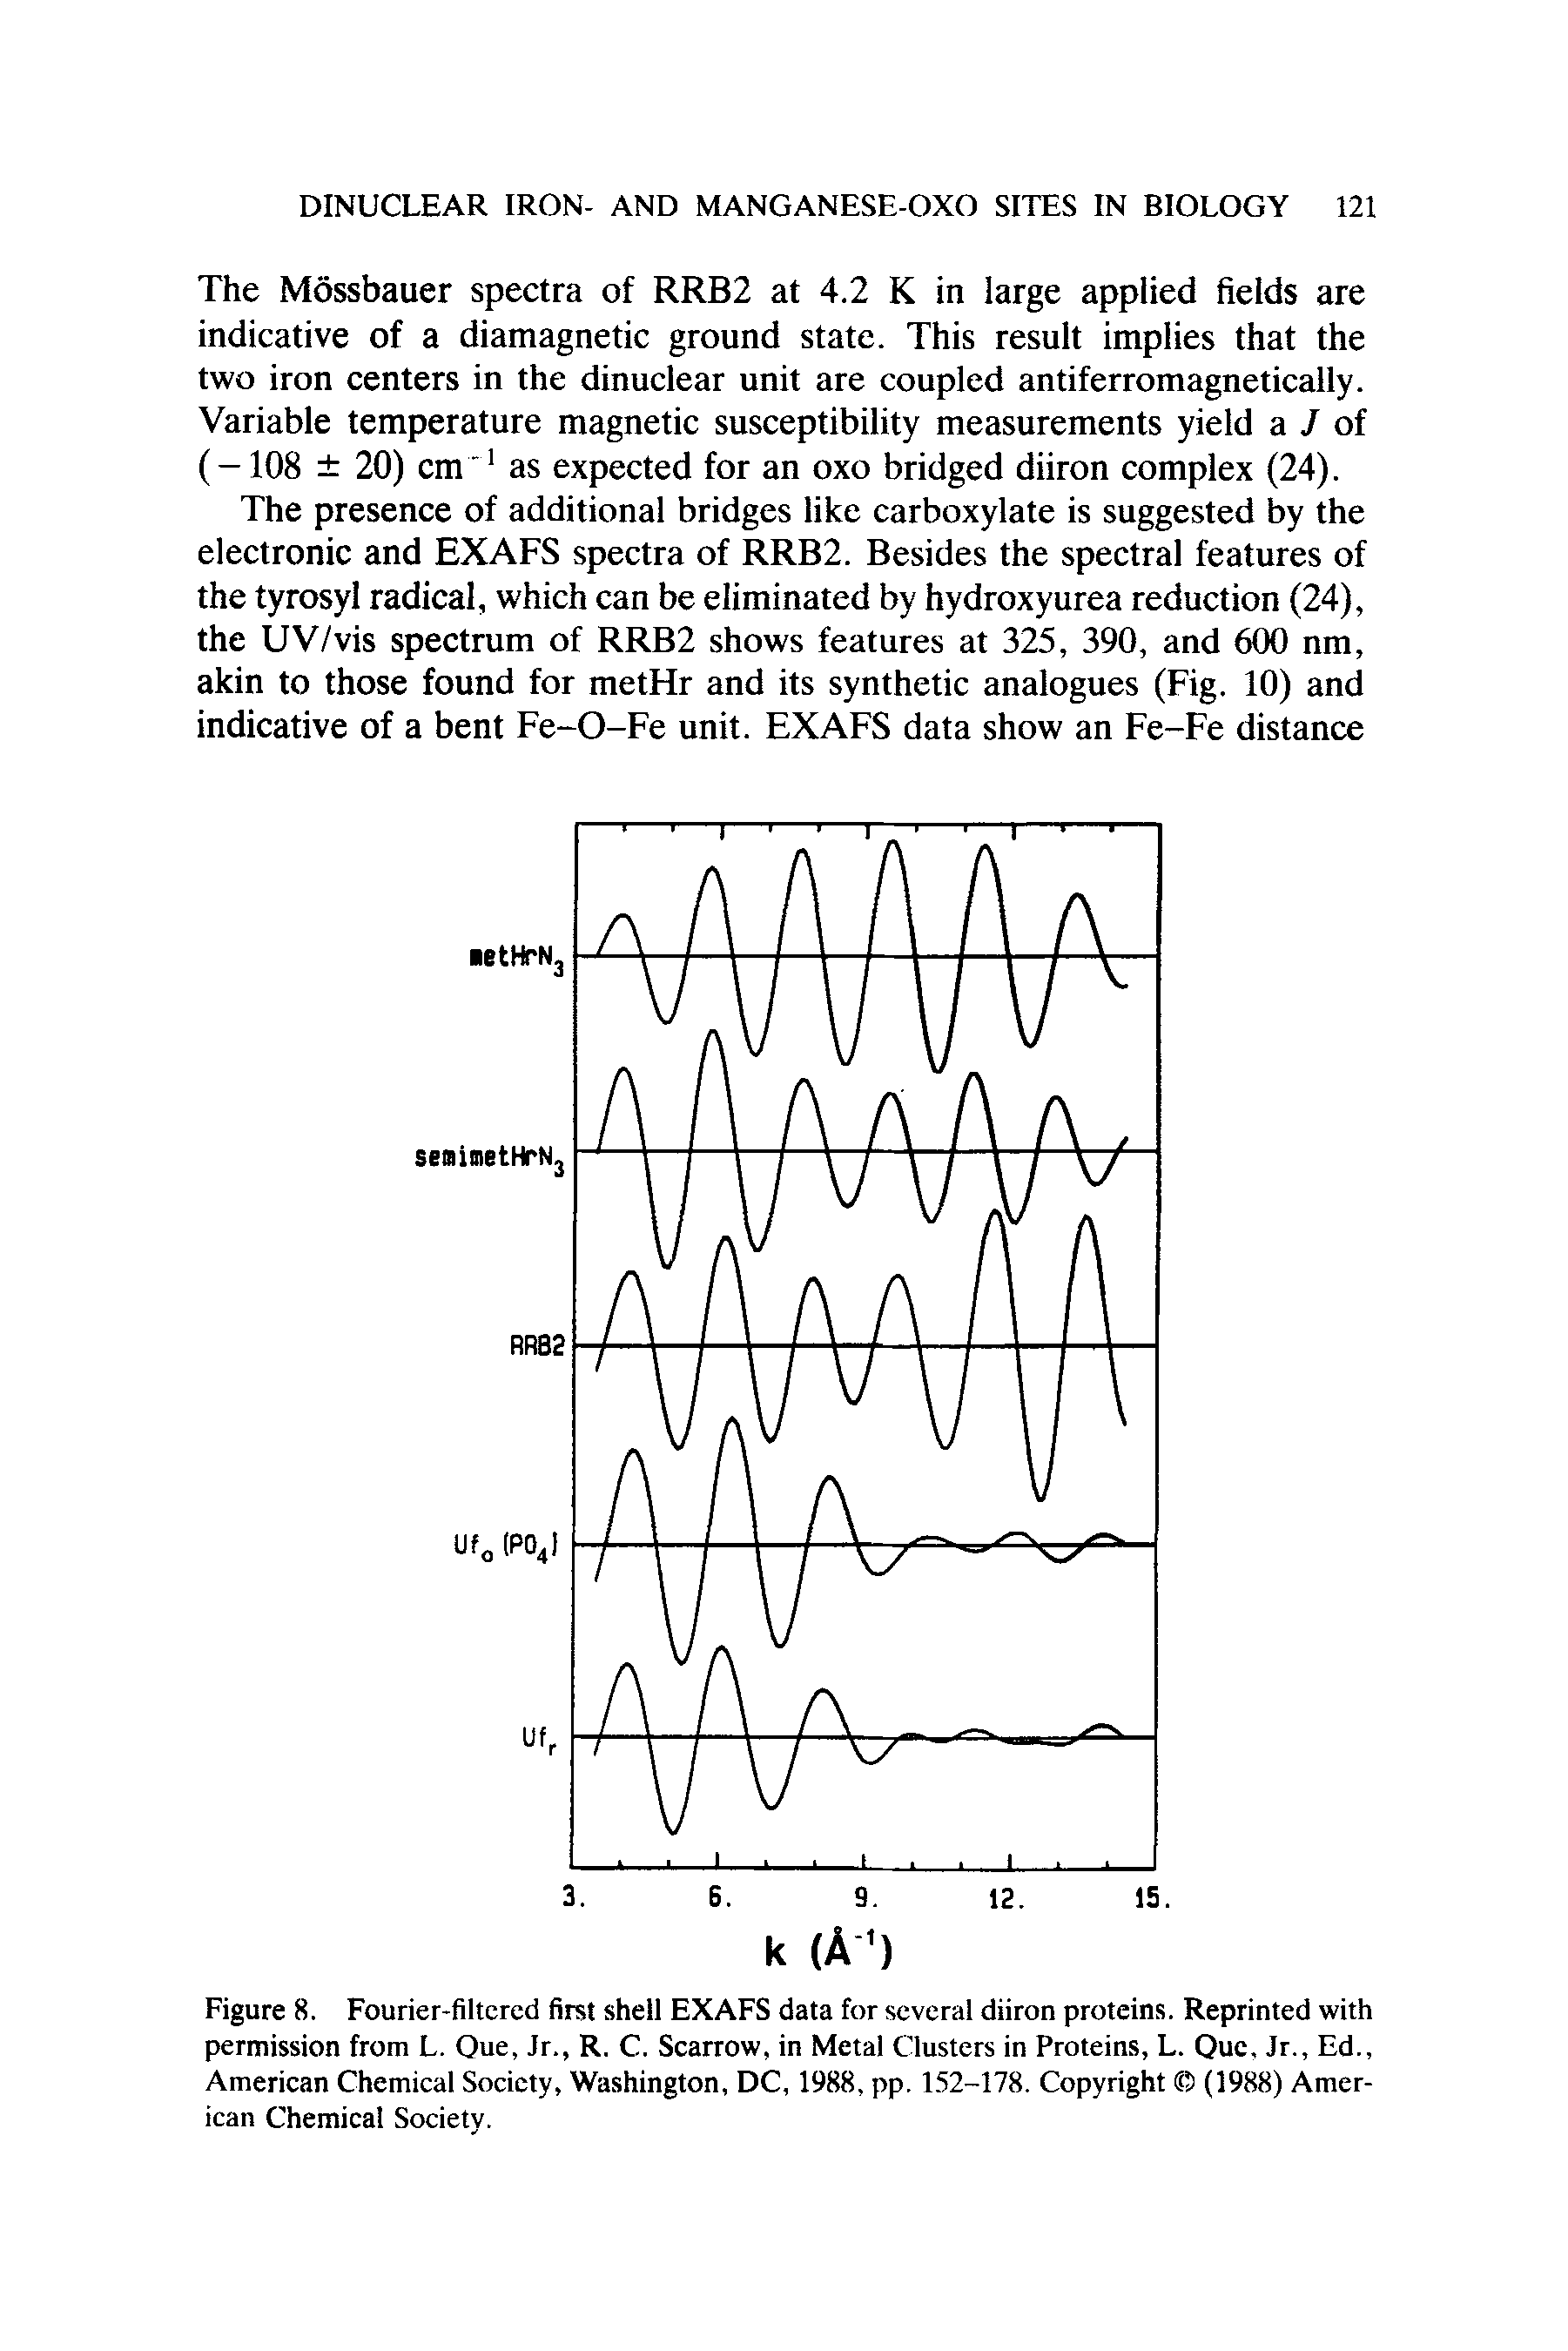 Figure 8. Fourier-filtered first shell EXAFS data for several diiron proteins. Reprinted with permission from L. Oue, Jr., R. C. Scarrow, in Metal Clusters in Proteins, L. Que, Jr., Ed., American Chemical Society, Washington, DC, 1988, pp, LS2-178. Copyright (1988) American Chemical Society.